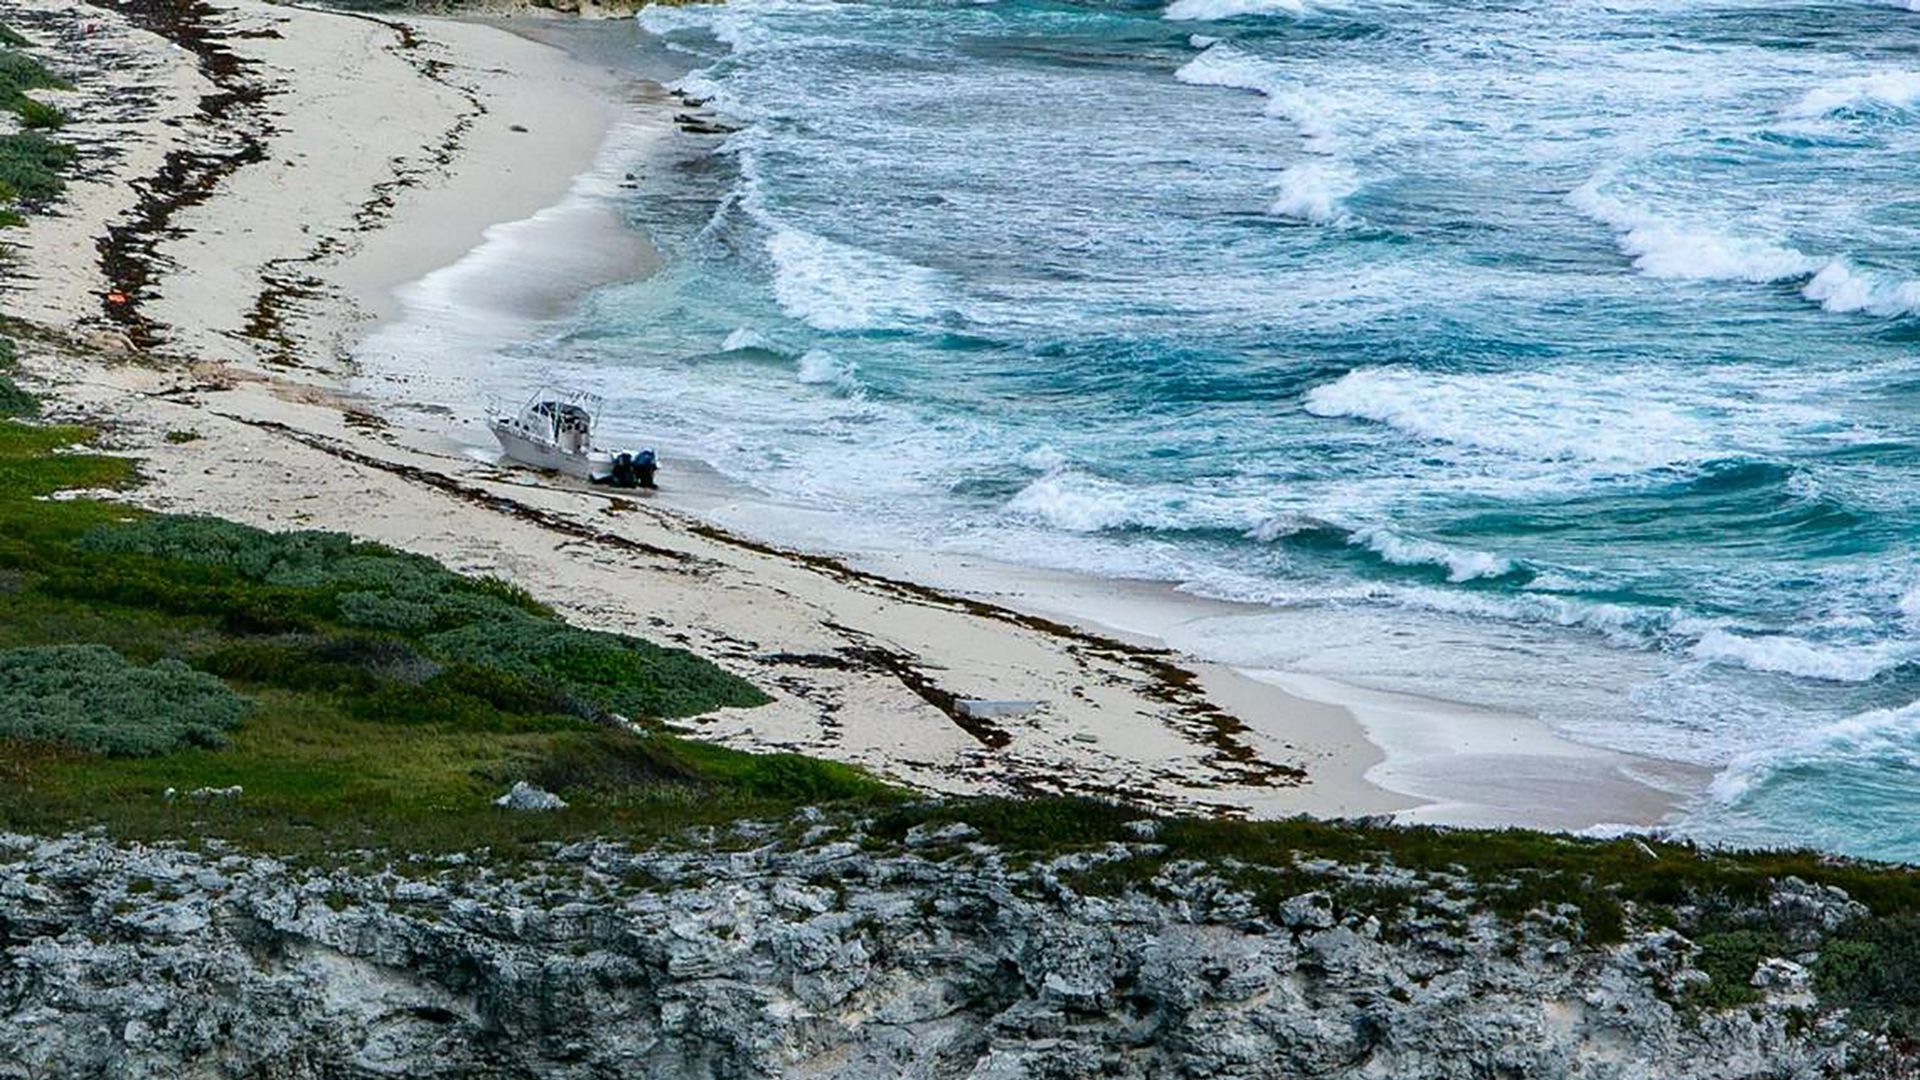 An abandoned vessel on a beach on a deserted island is seen during a U.S. Coast Guard reconnaissance flight on April 22, 2022, over the Florida Straits and the Bahamas. (Getty Images)